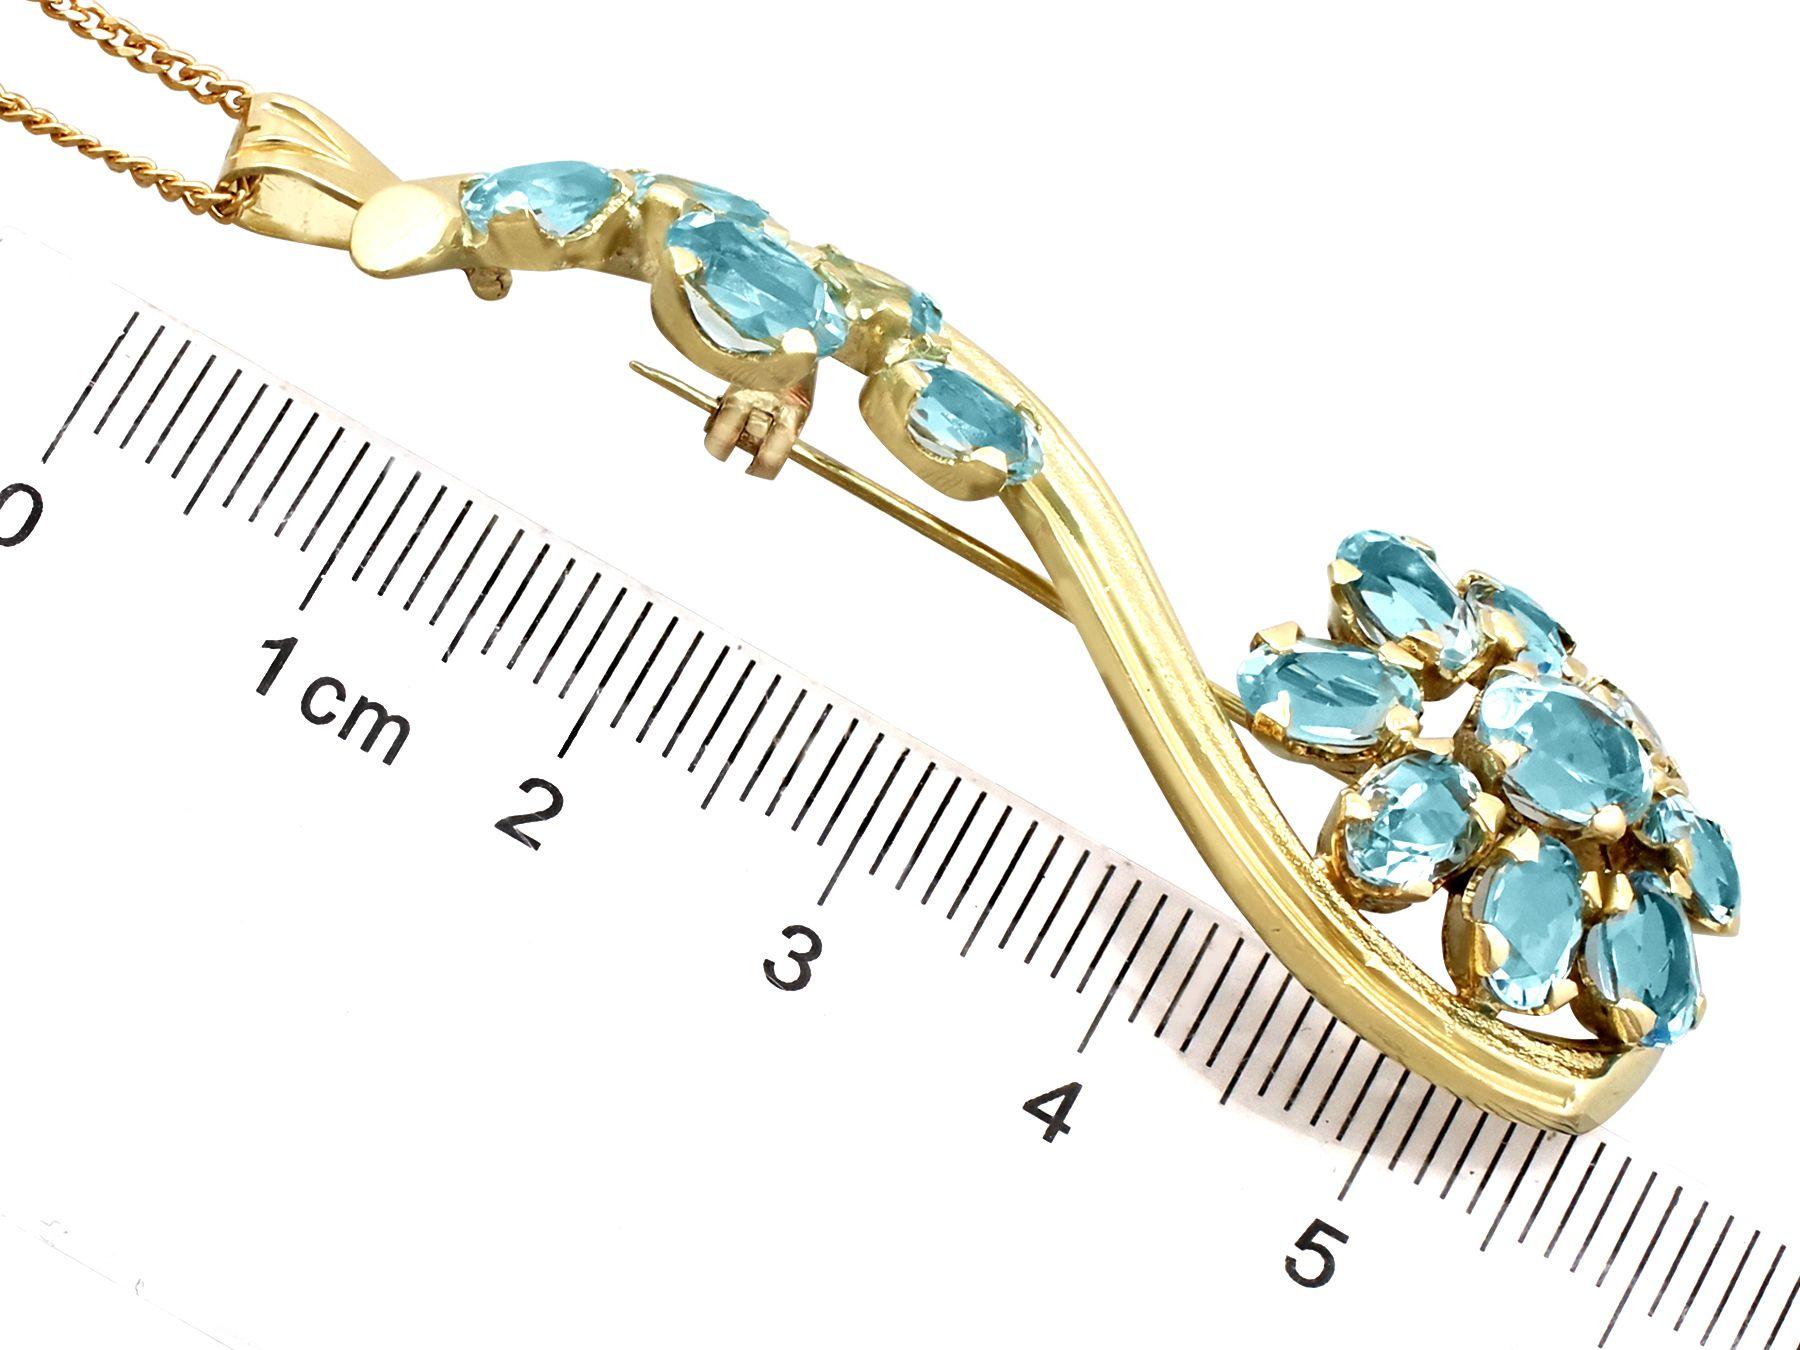 Vintage 1950s 6.05 Carat Aquamarine and Yellow Gold Pendant / Brooch For Sale 2